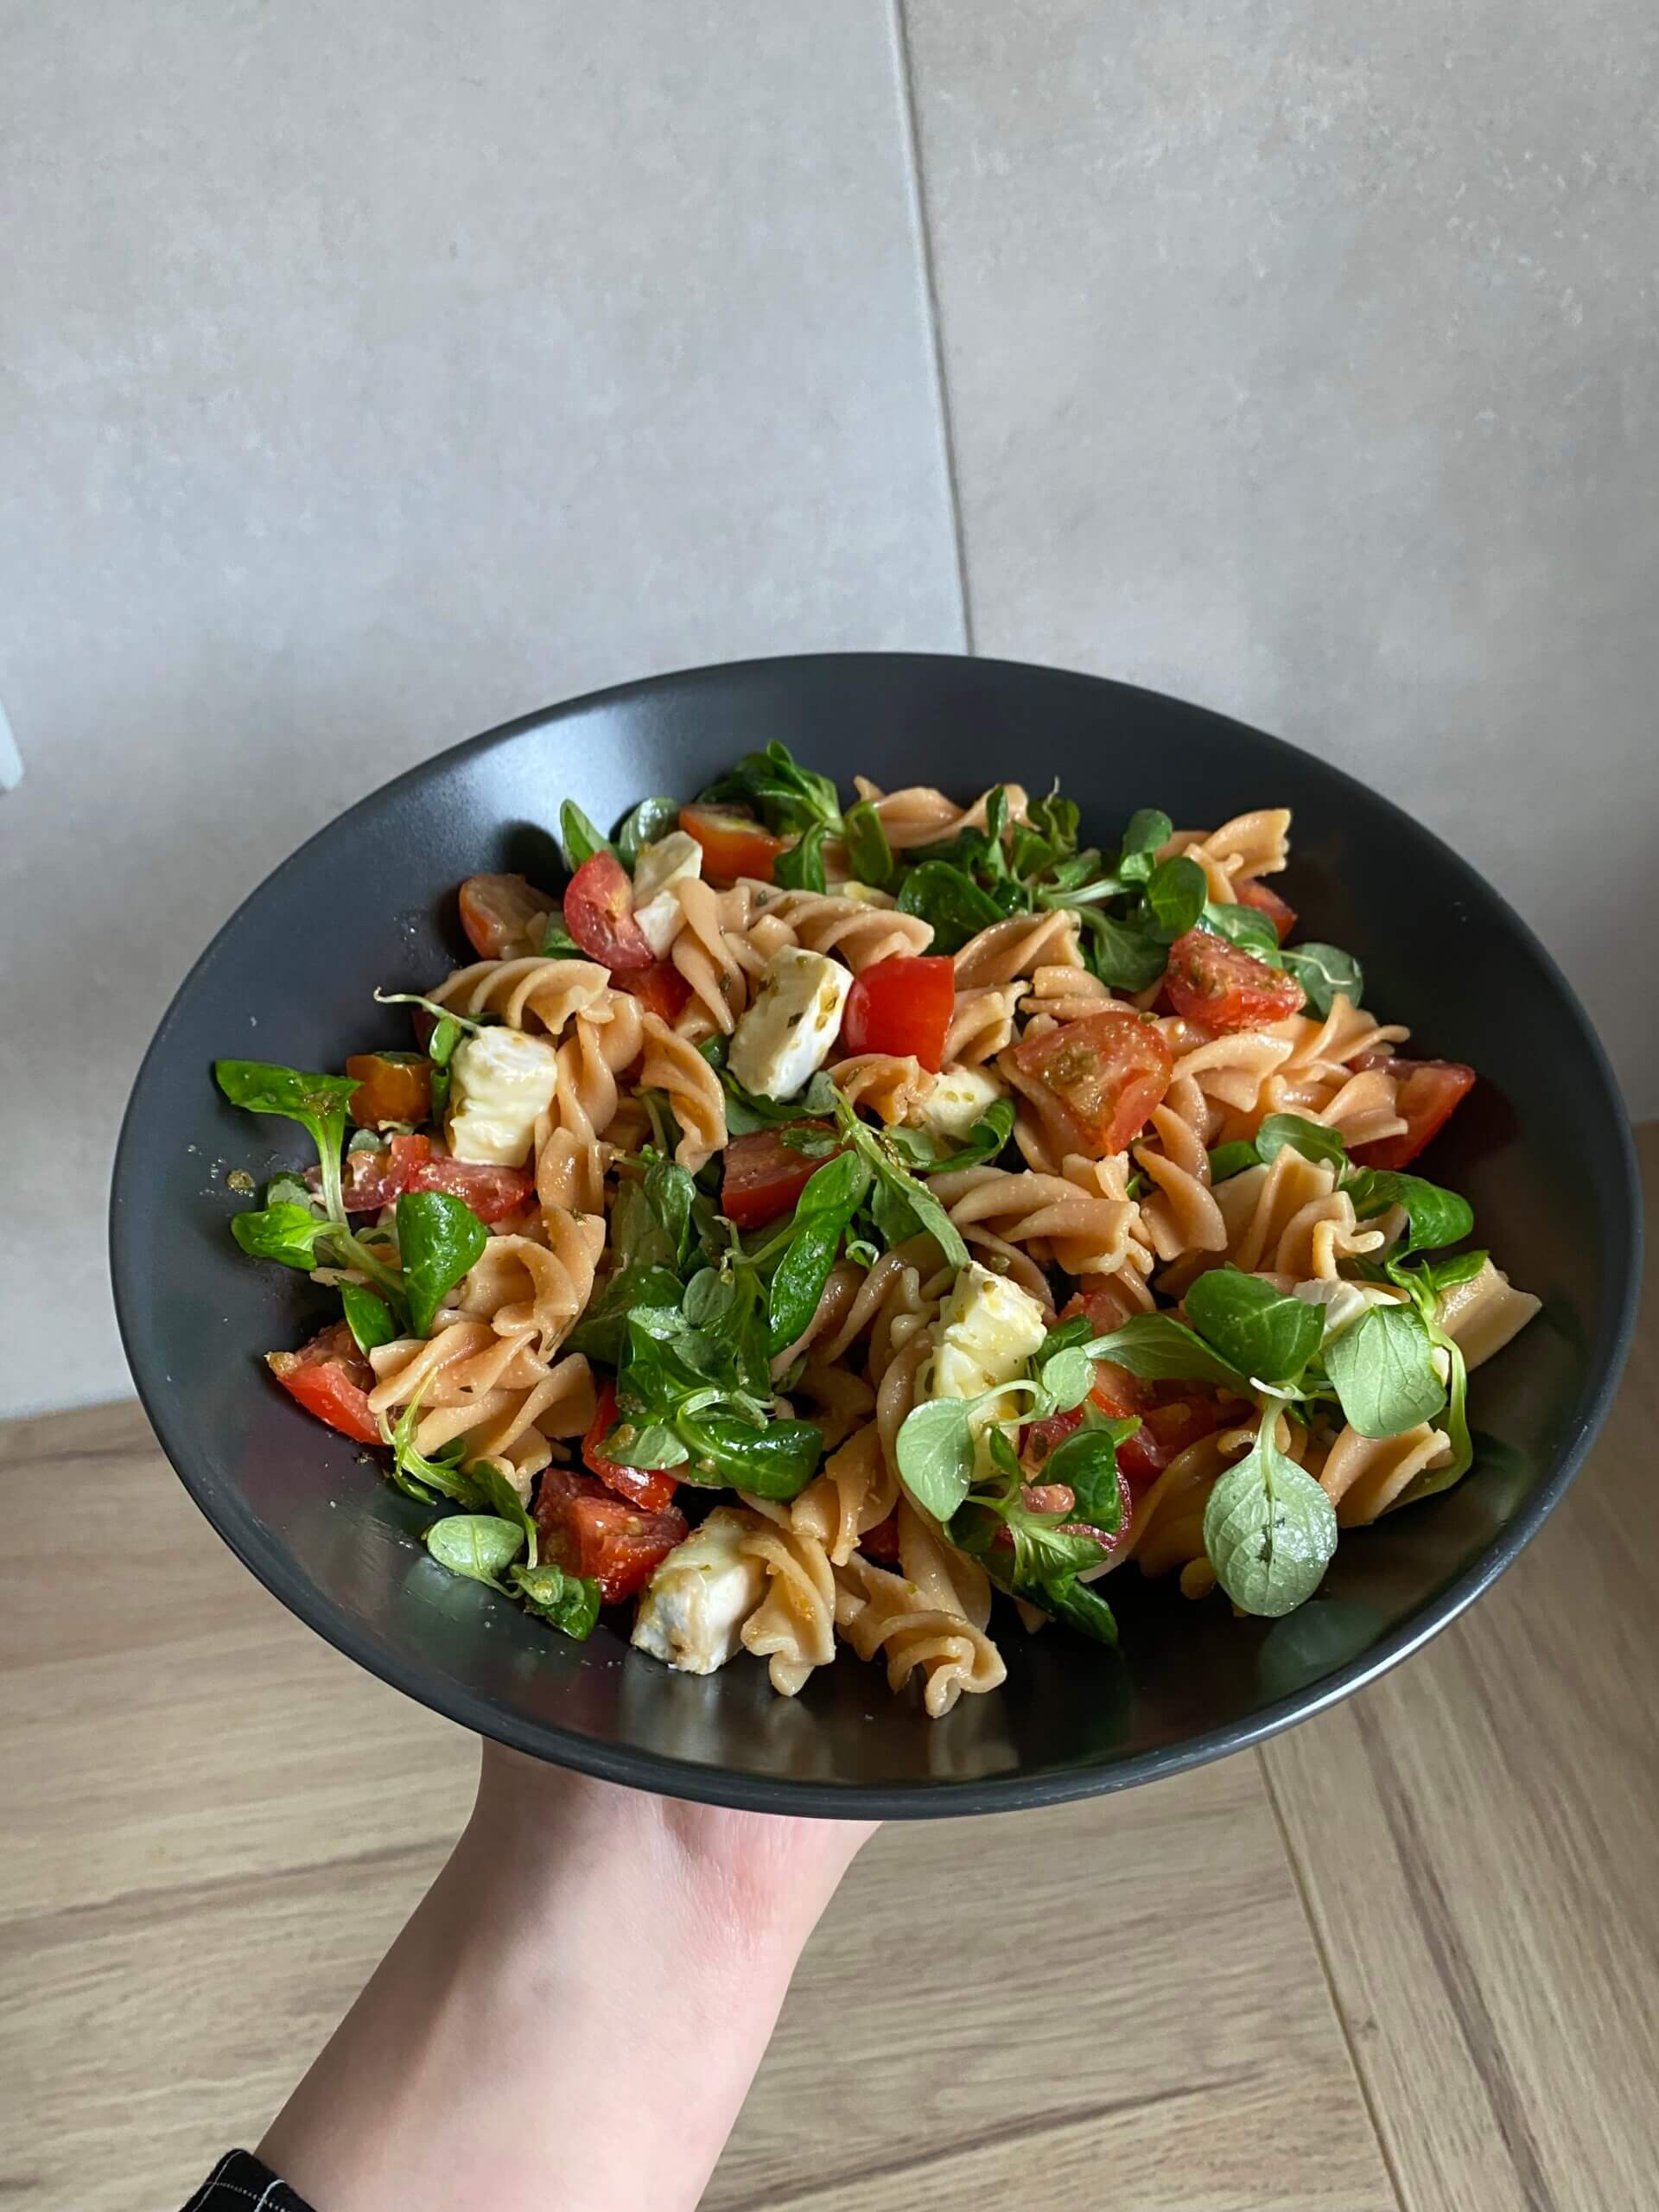 Salad with lentil pasta and camembert